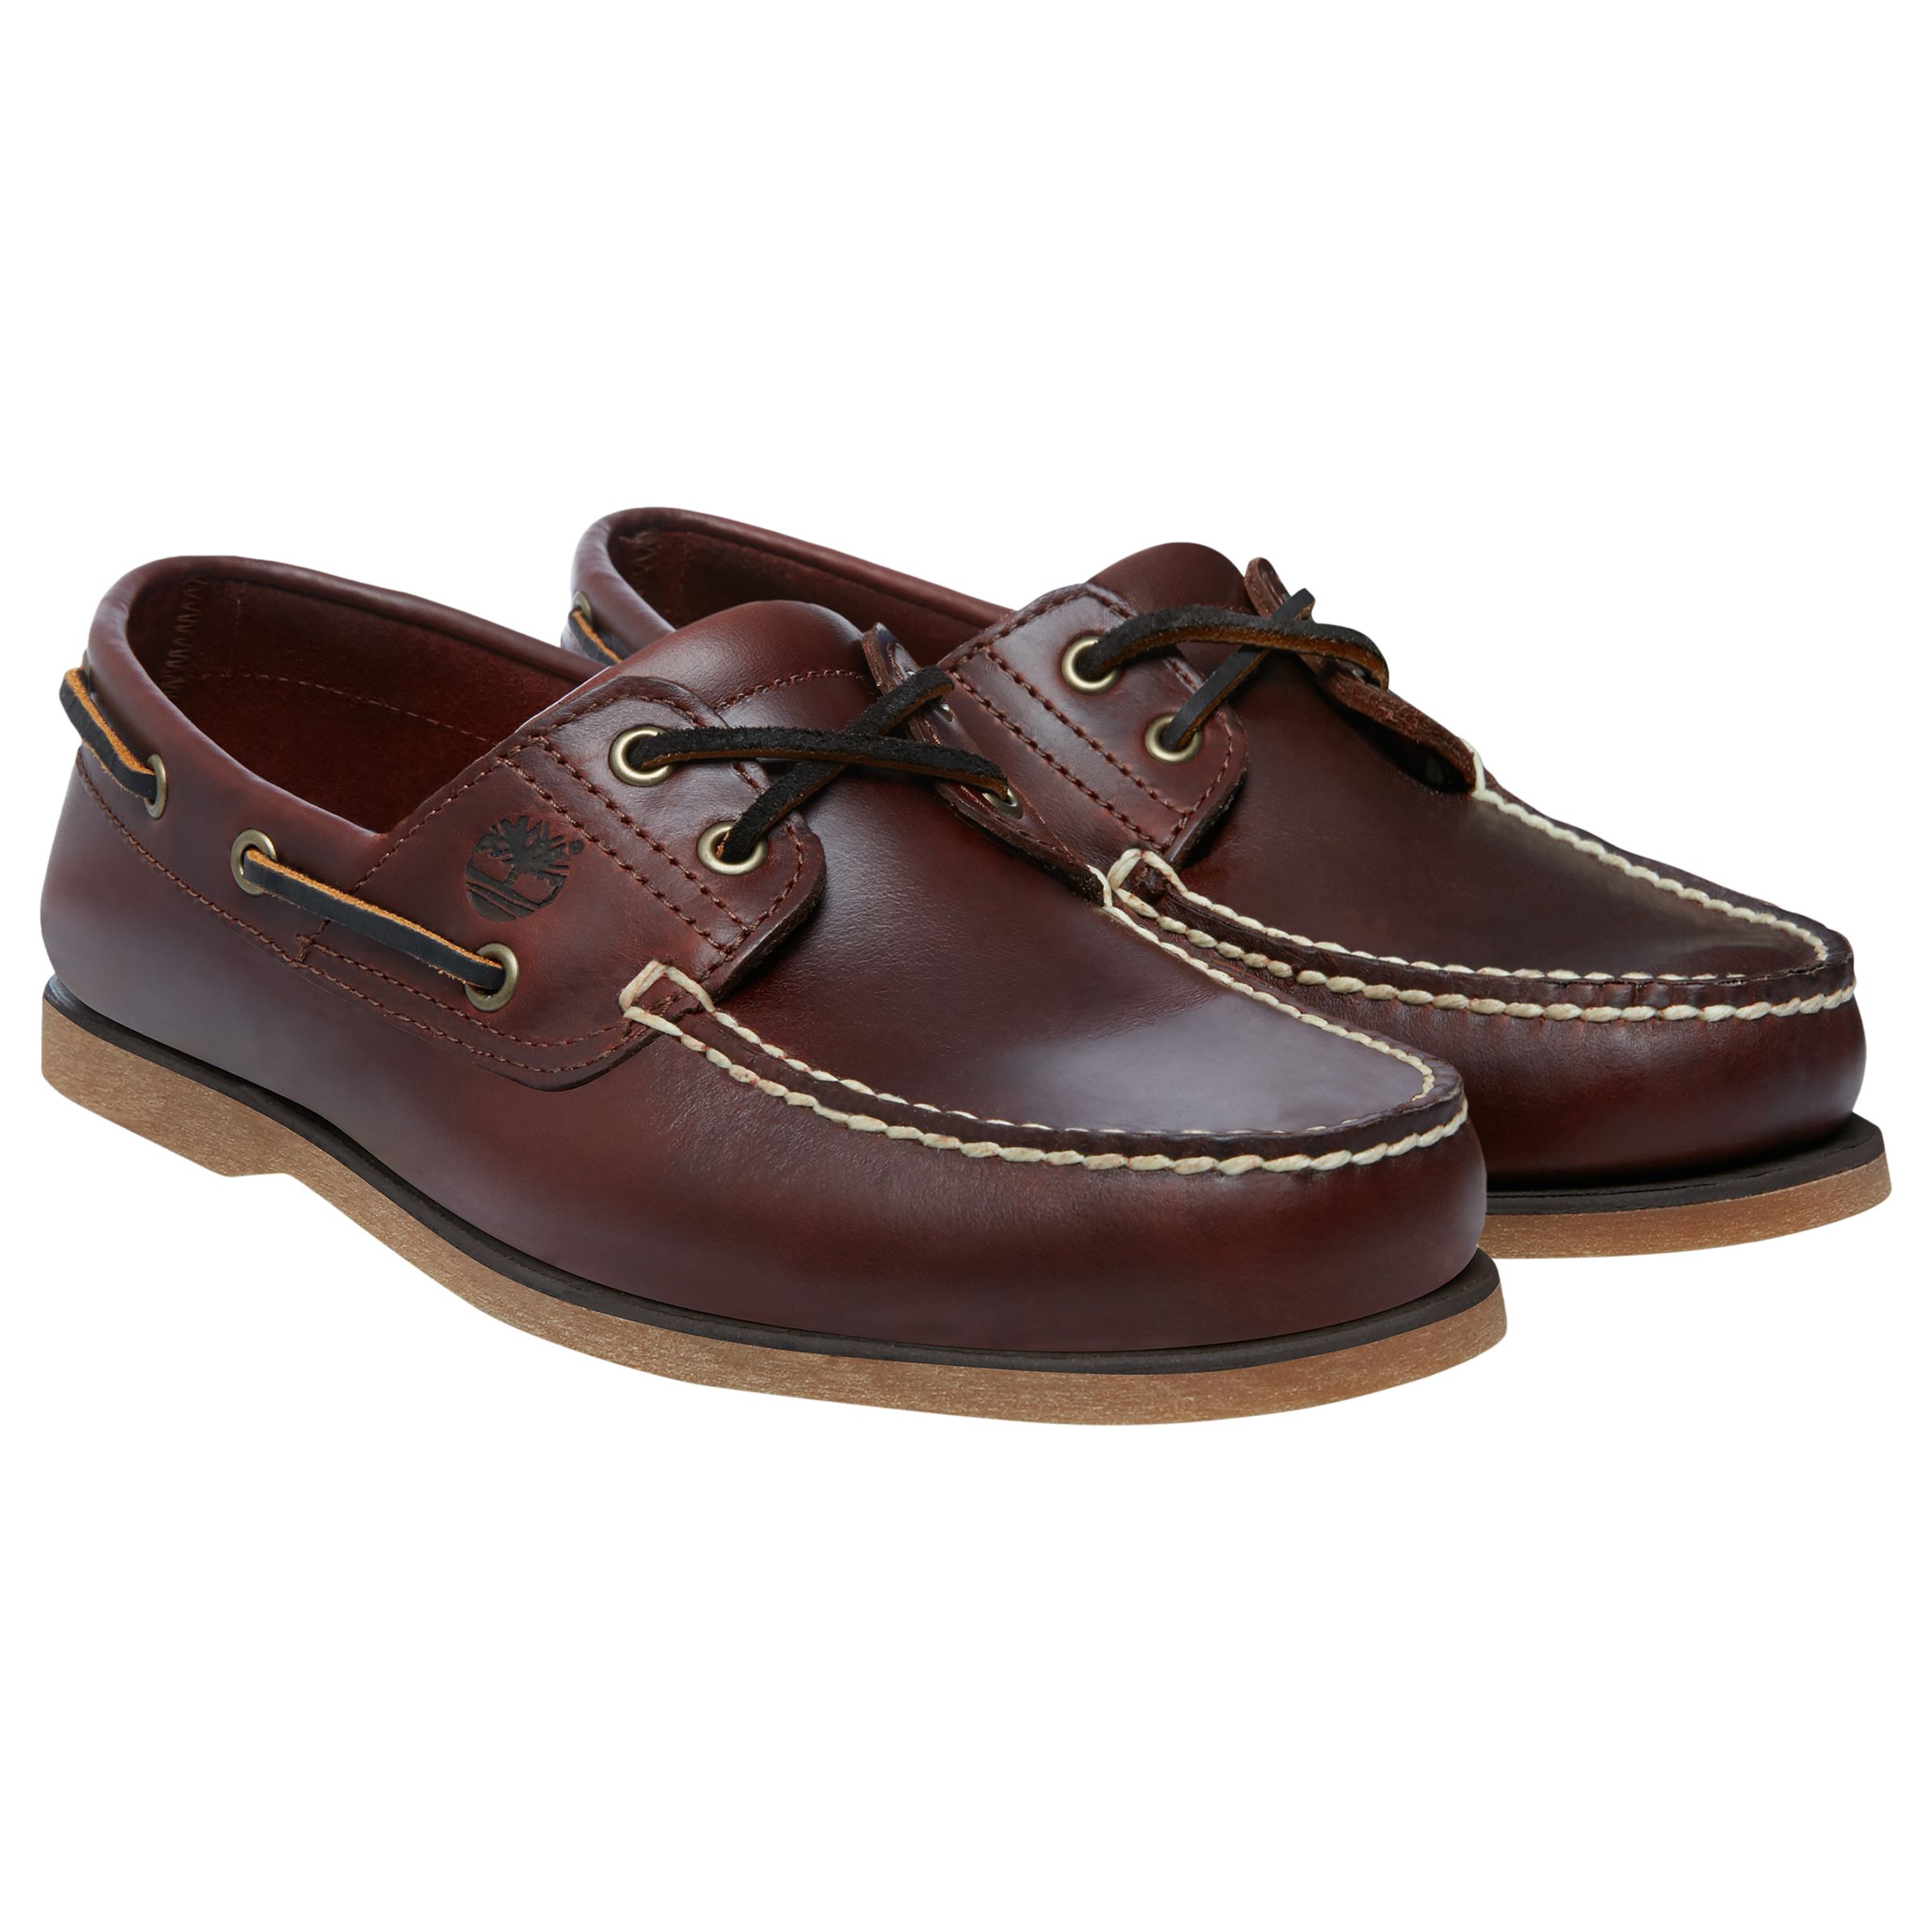 Timberland Leather Boat Shoes, Brown at 